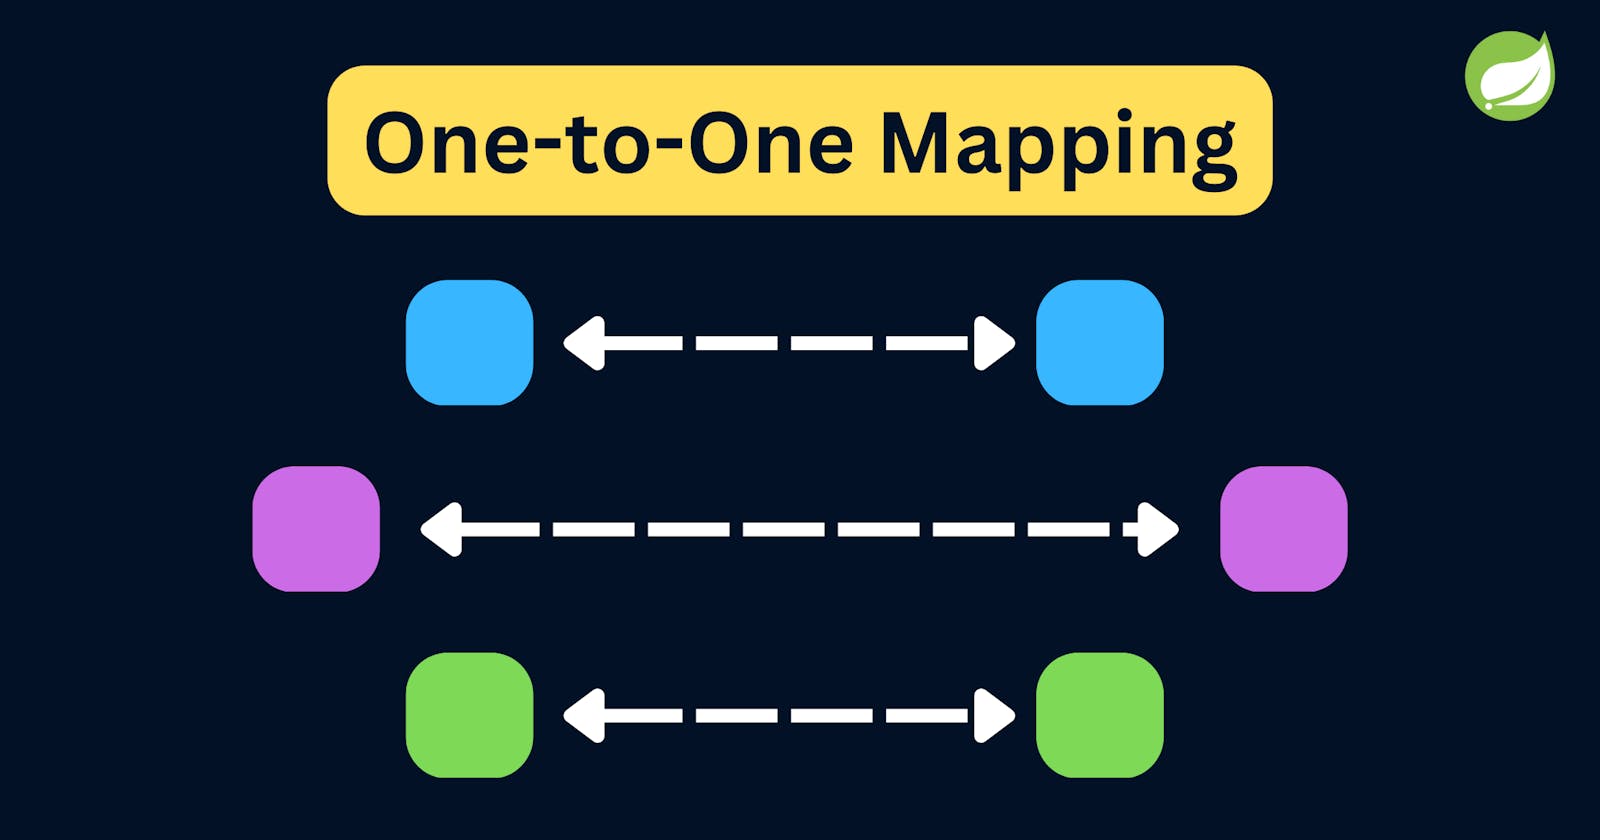 How to implement one-to-one mapping in Spring Boot?